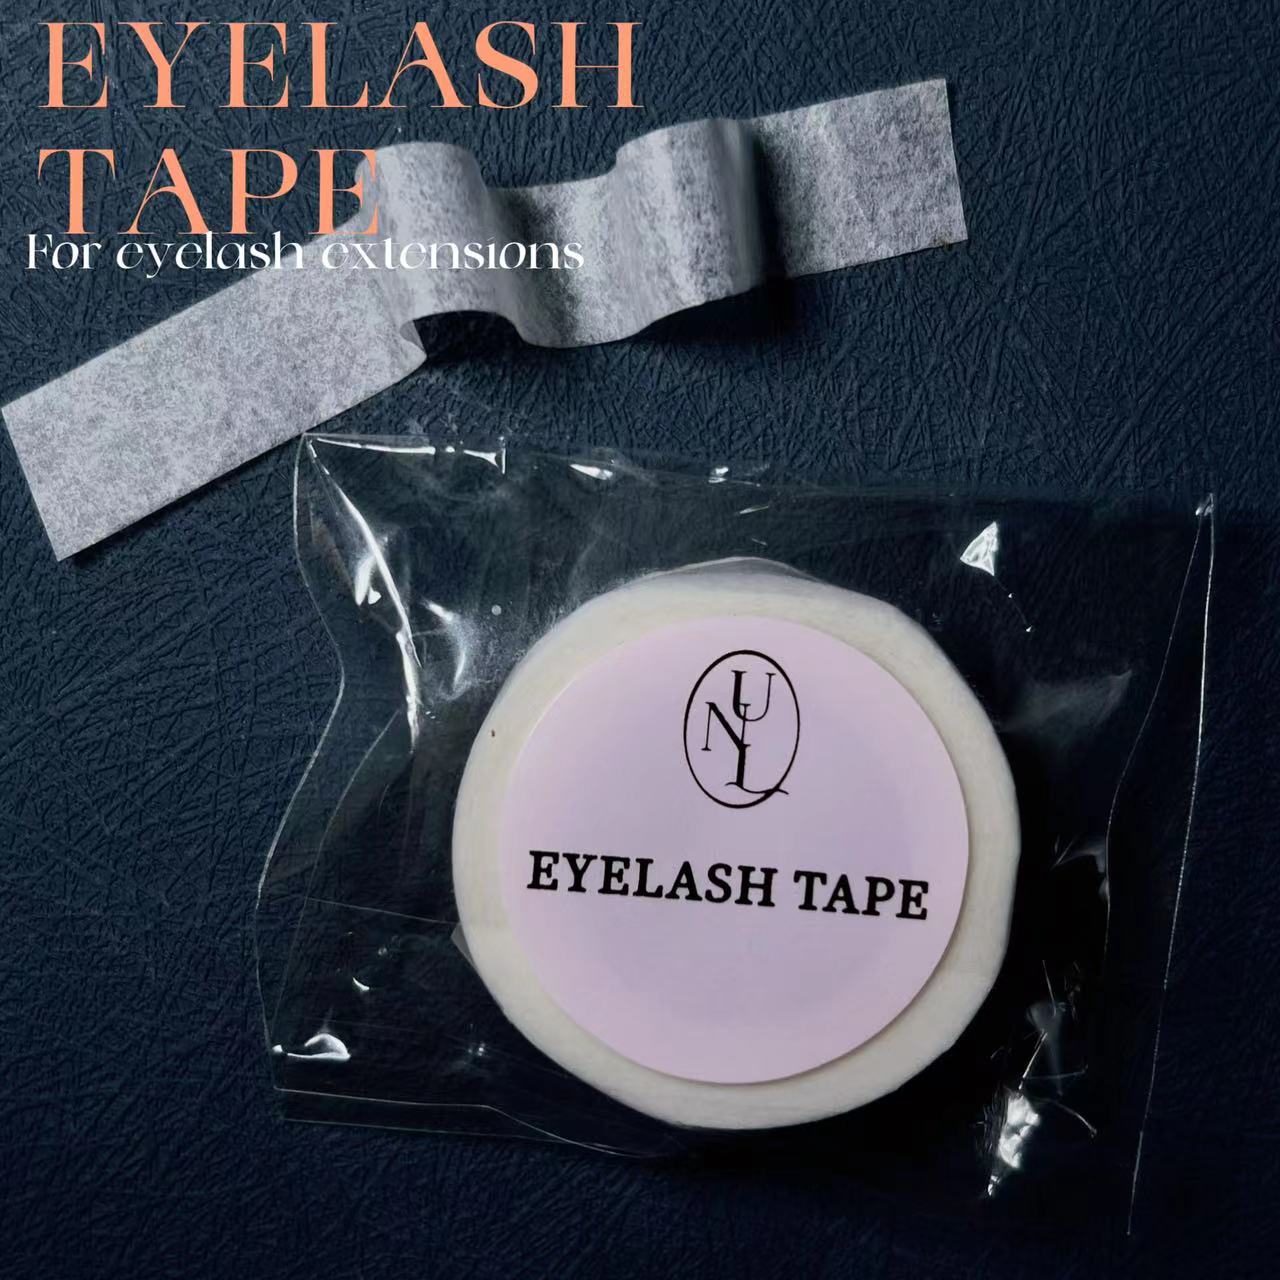 UNIQUELASH Eyelash Tape 1 Roll Breathable Non-woven Cloth Adhesive Tape for Hand Eye Stickers Makeup Tools Eye Patches for Extension